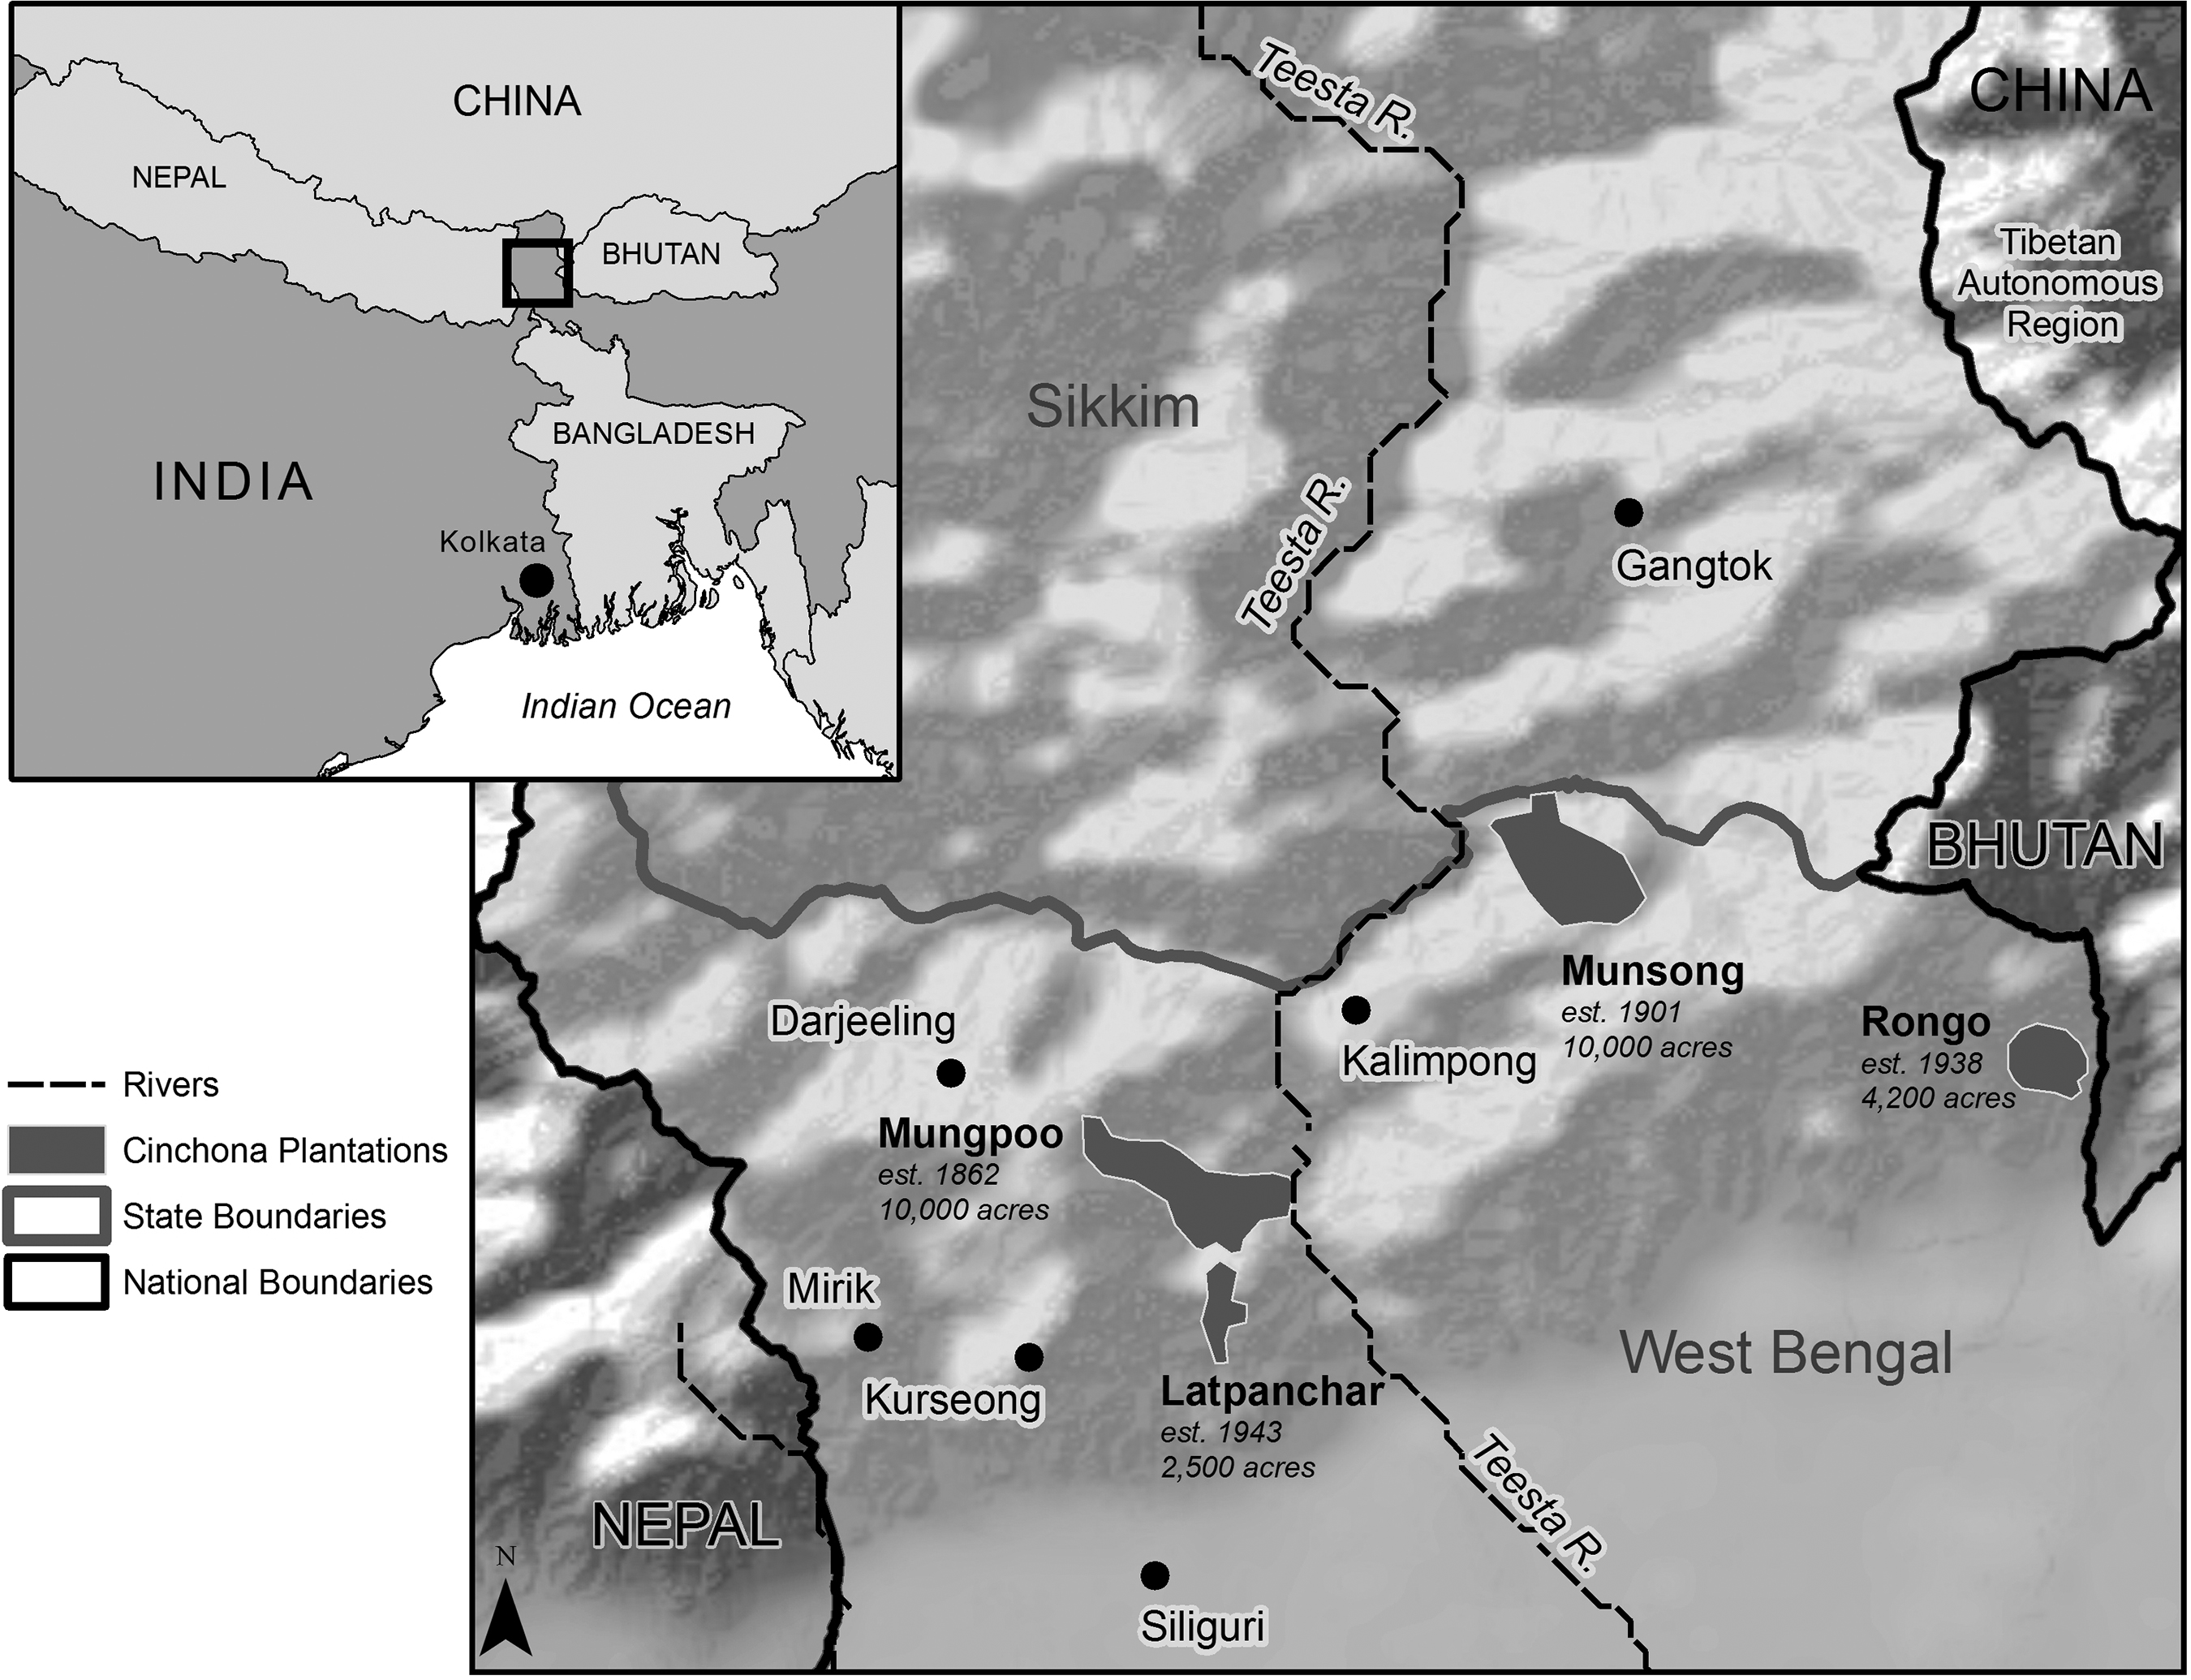 The colonial cinchona frontier in the Darjeeling hills. Map prepared by UNC-Libraries.